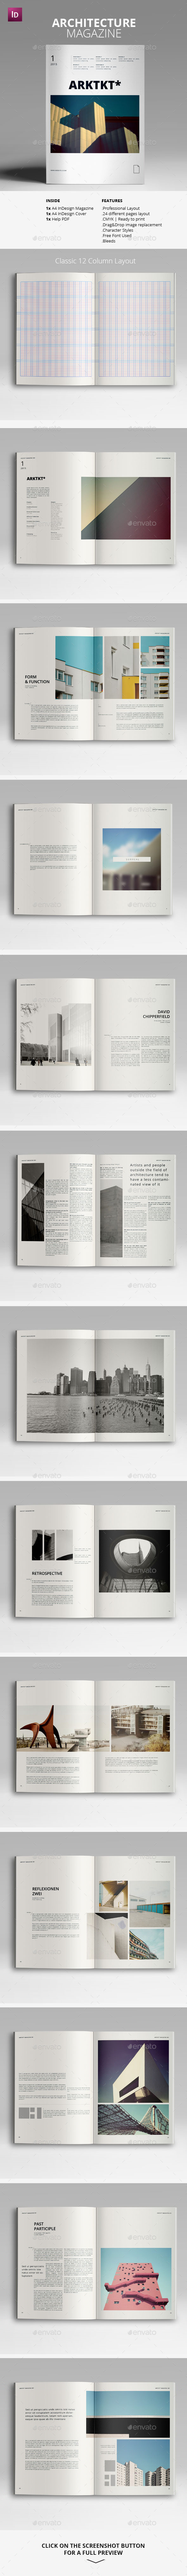 Architectural mag